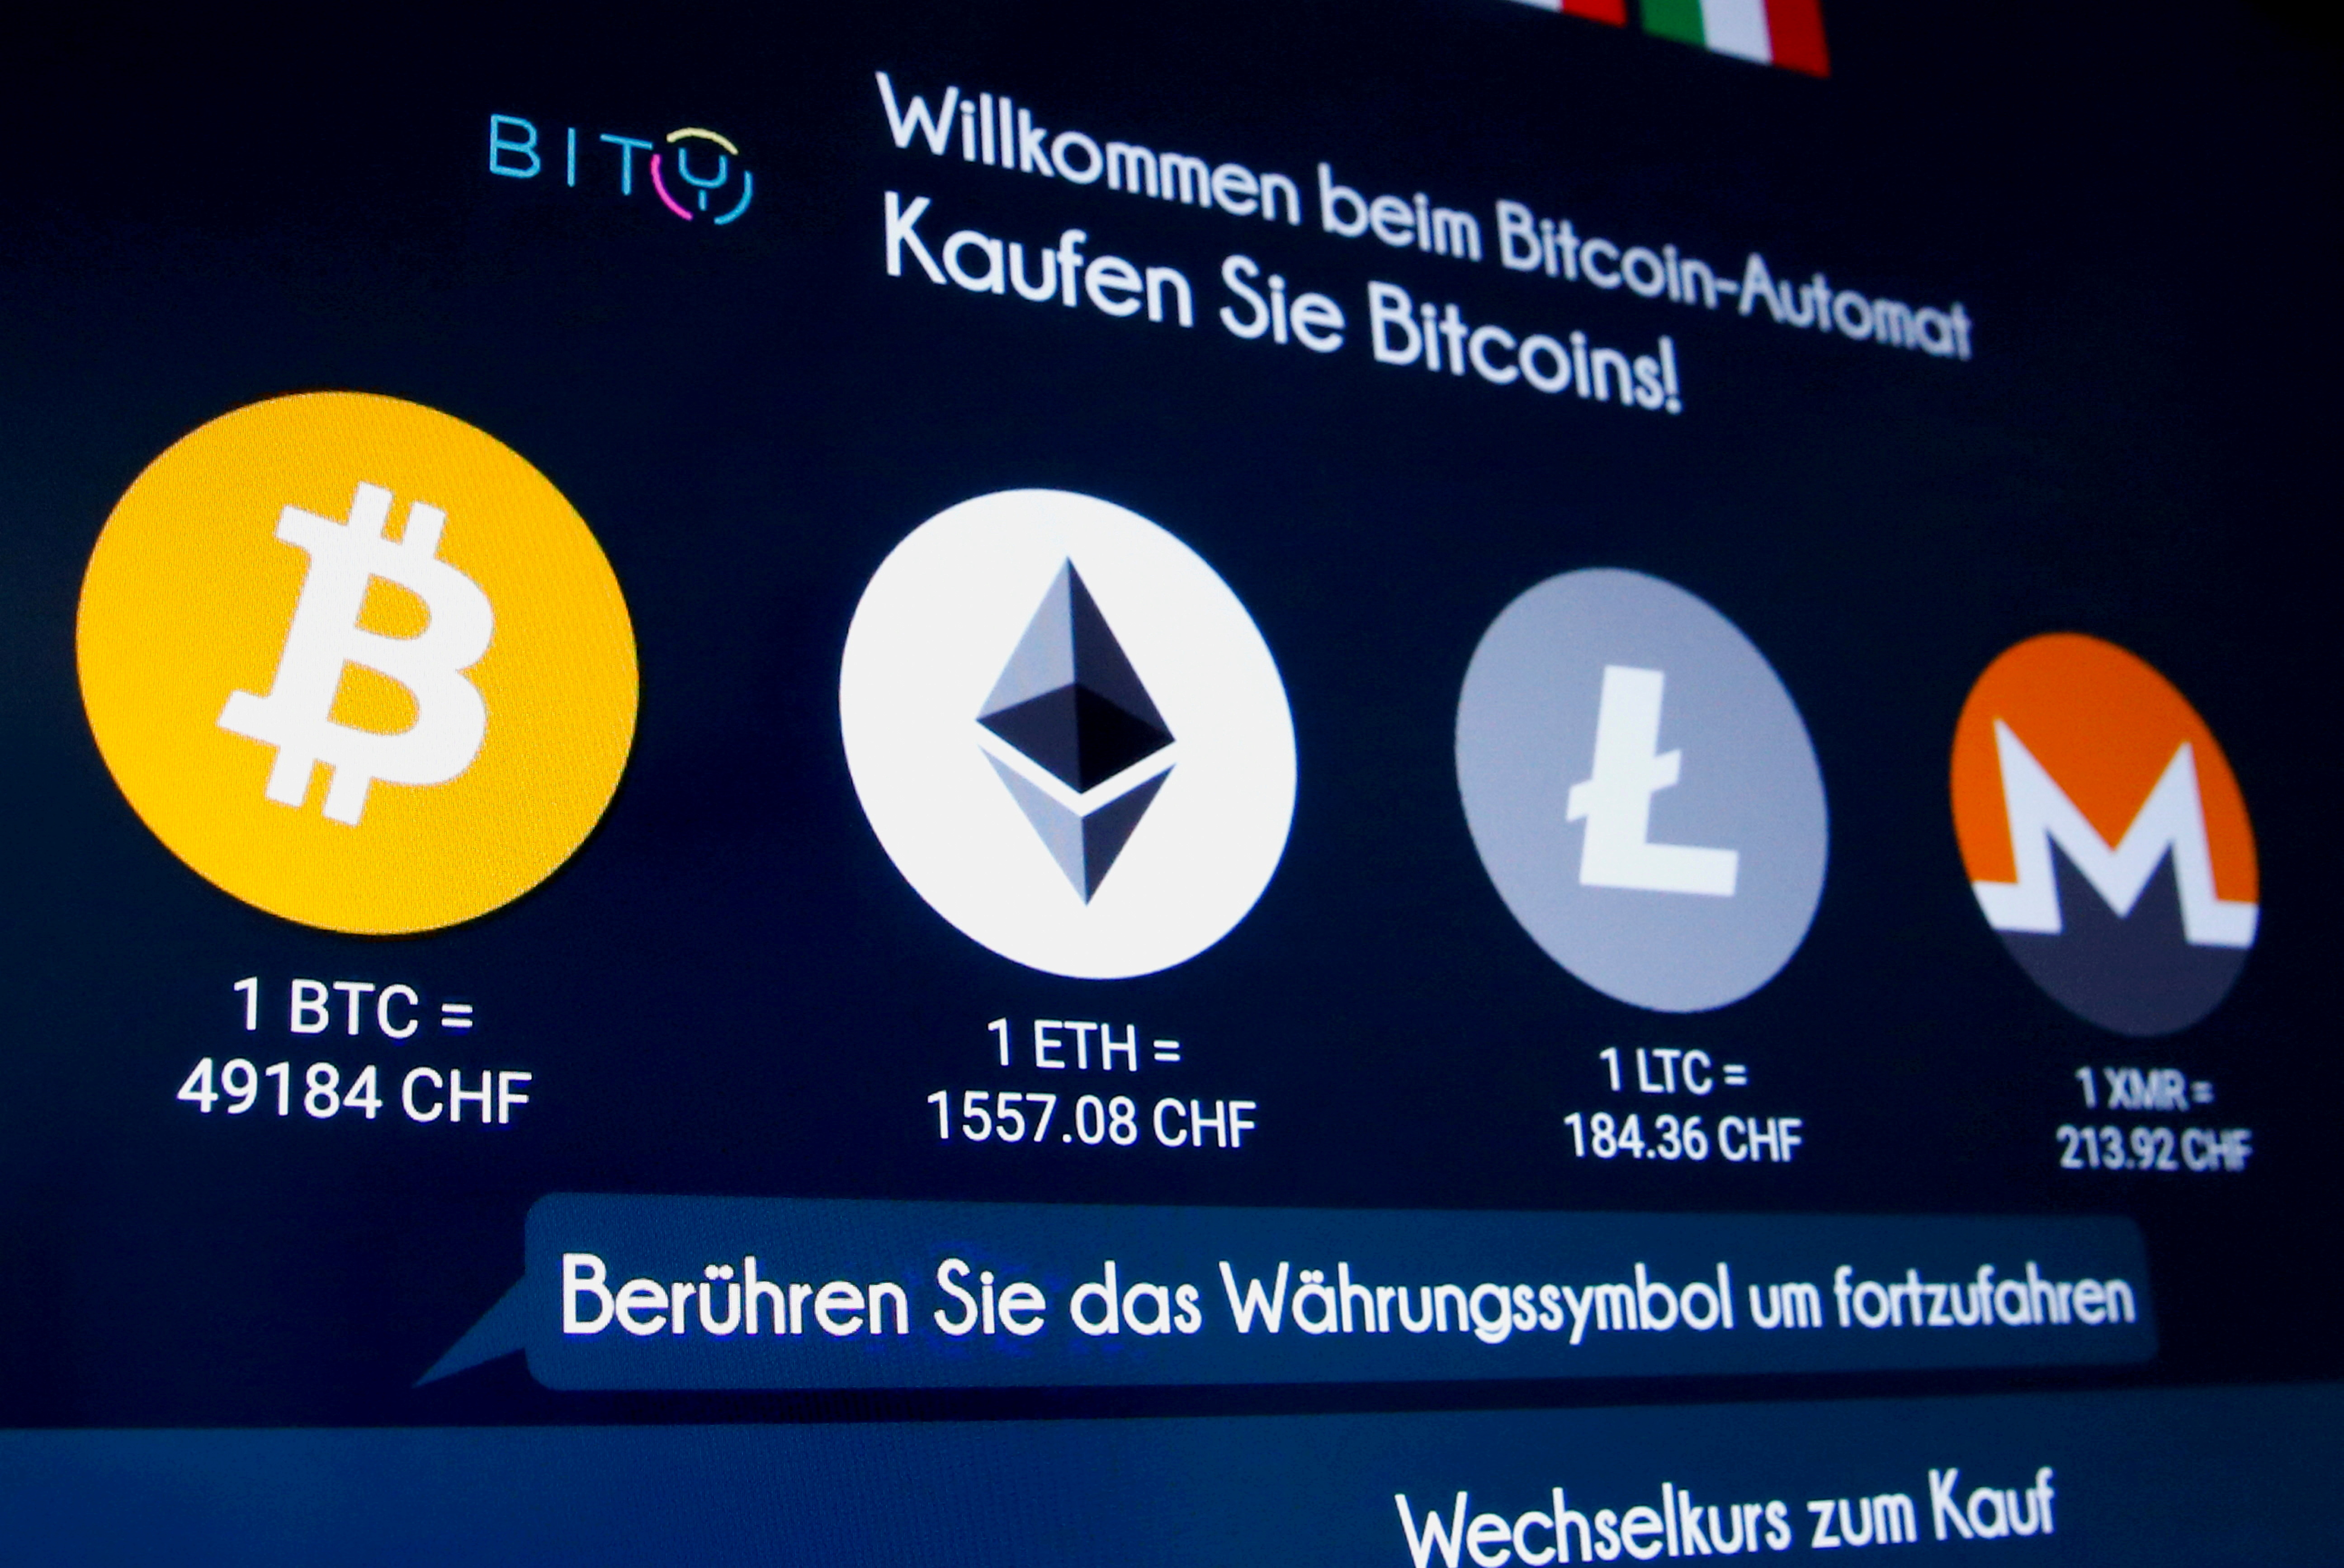 The exchange rates and logos of Bitcoin, Ether, Litecoin and Monero are seen on the display of a cryptocurrency ATM in Zurich